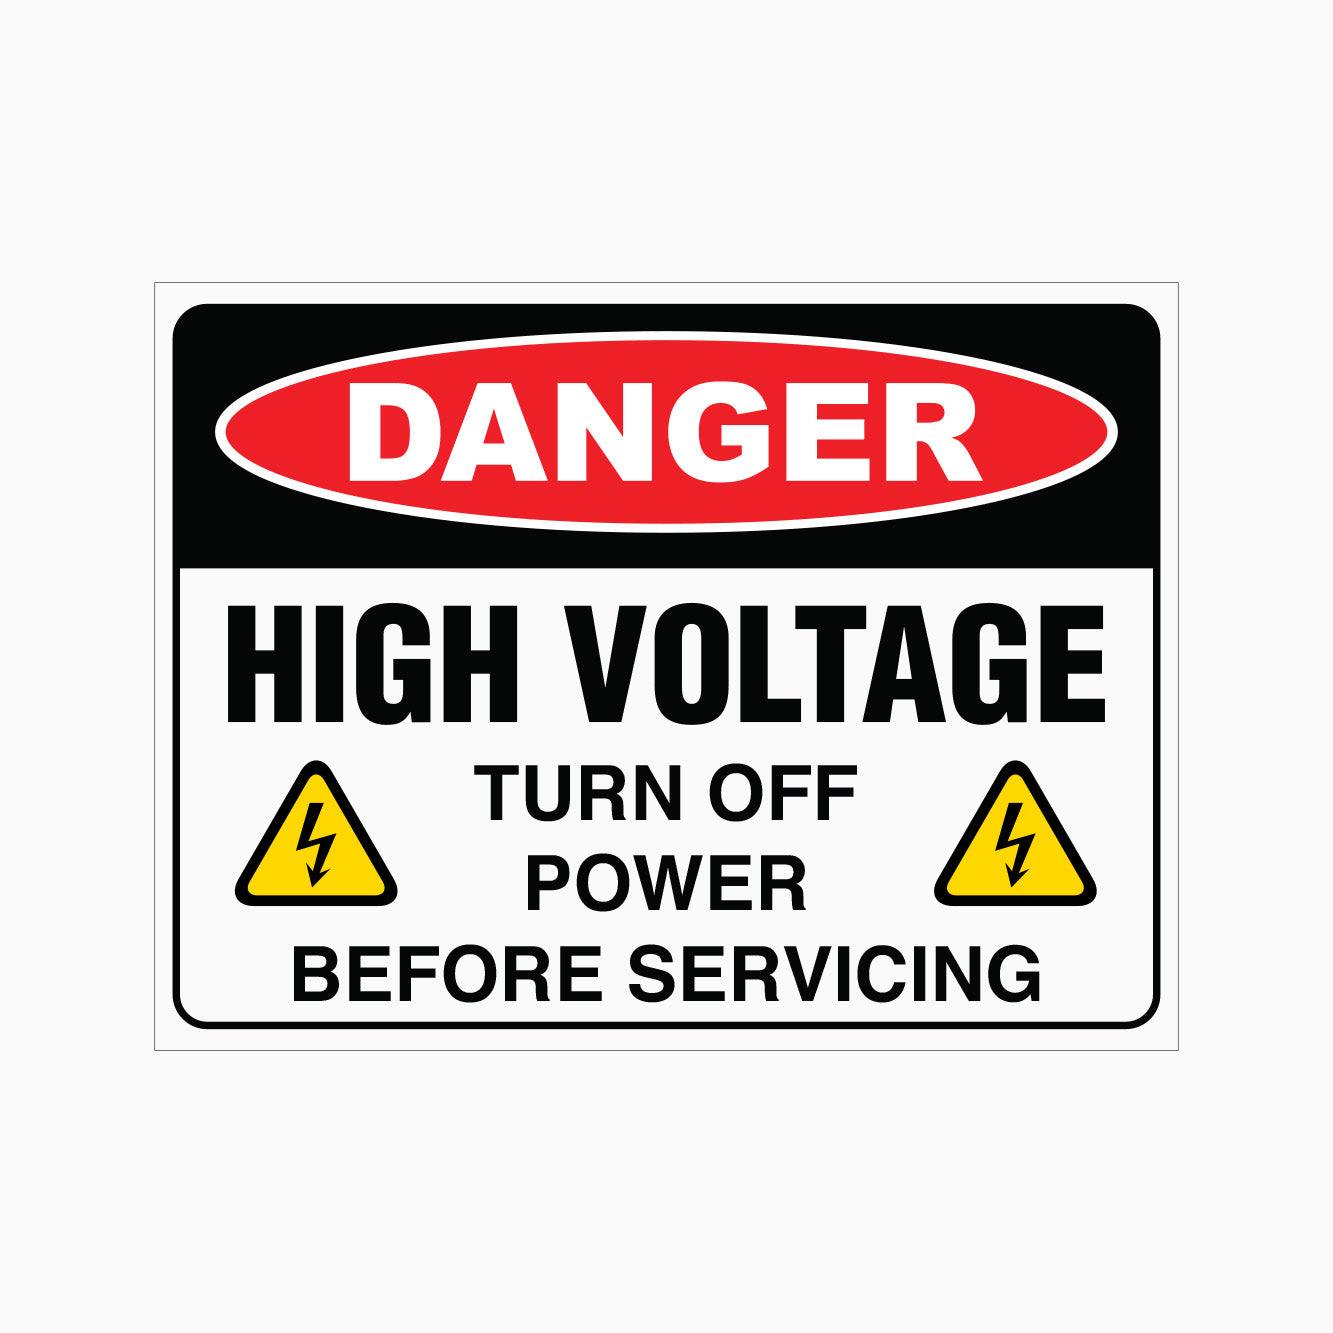 HIGH VOLTAGE TURN OFF POWER BEFORE SERVICING SIGN - get signs